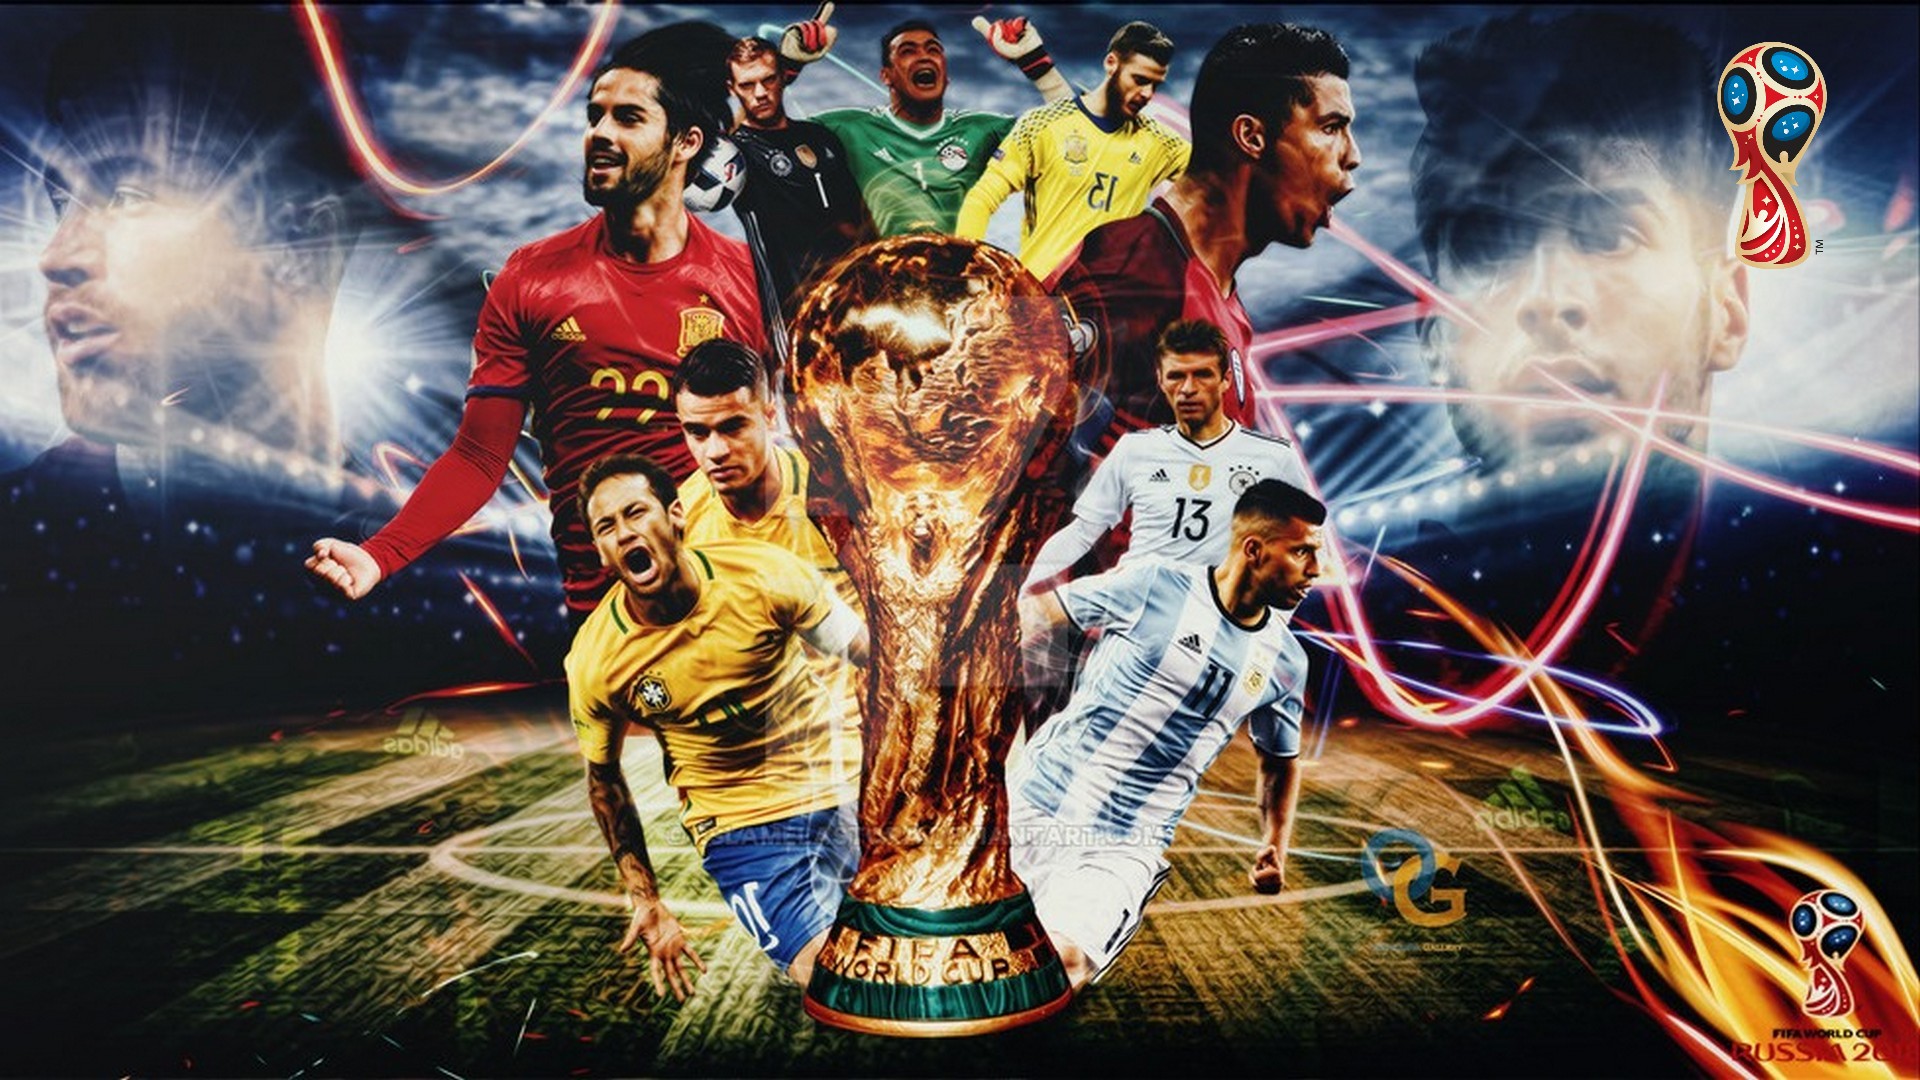 World Cup Russia HD Wallpapers with resolution 1920x1080 pixel. You can make this wallpaper for your Mac or Windows Desktop Background, iPhone, Android or Tablet and another Smartphone device